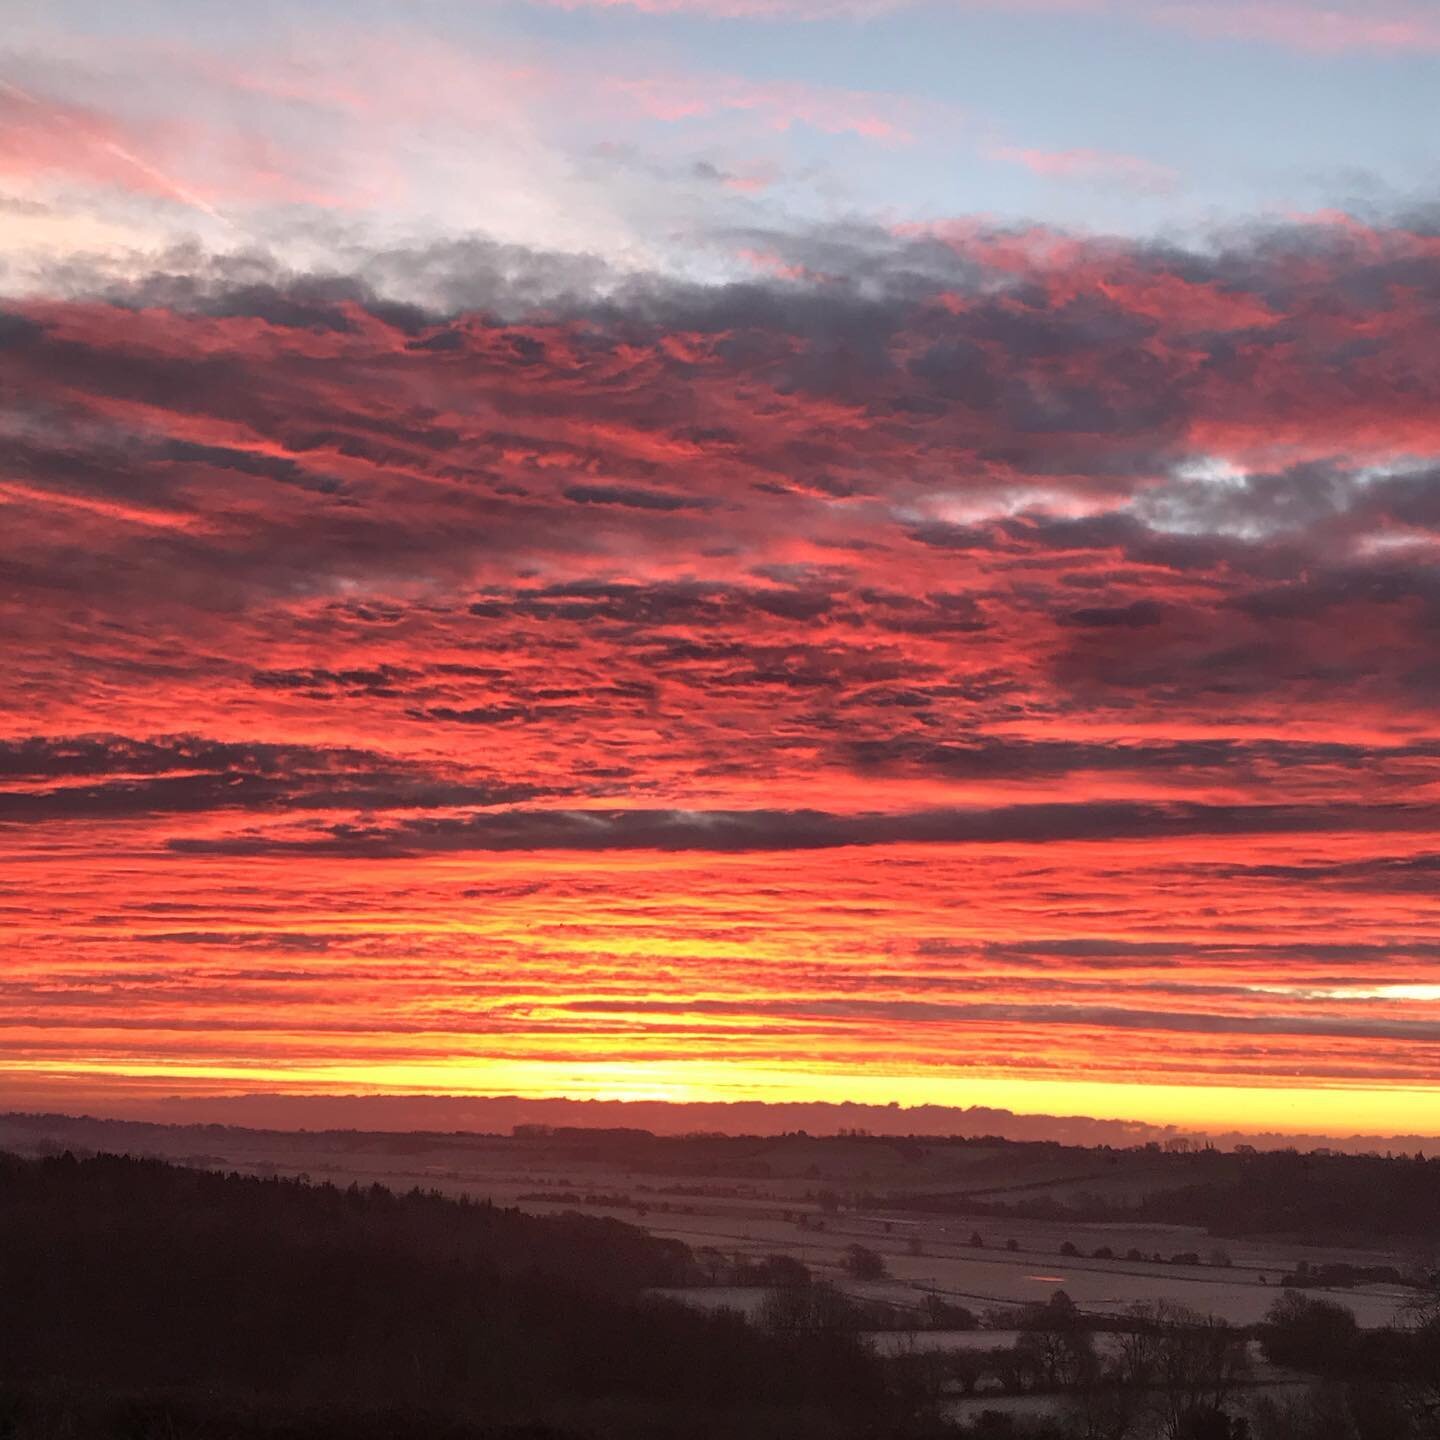 Wow what a sky this morning @barefootyurts I&rsquo;m busy painting freshening everything up for 2020 &lsquo; this sunrise a bit of a distraction 😊&rsquo; Looking forward to the new season ahead and to welcoming new and old guests to come and enjoy t